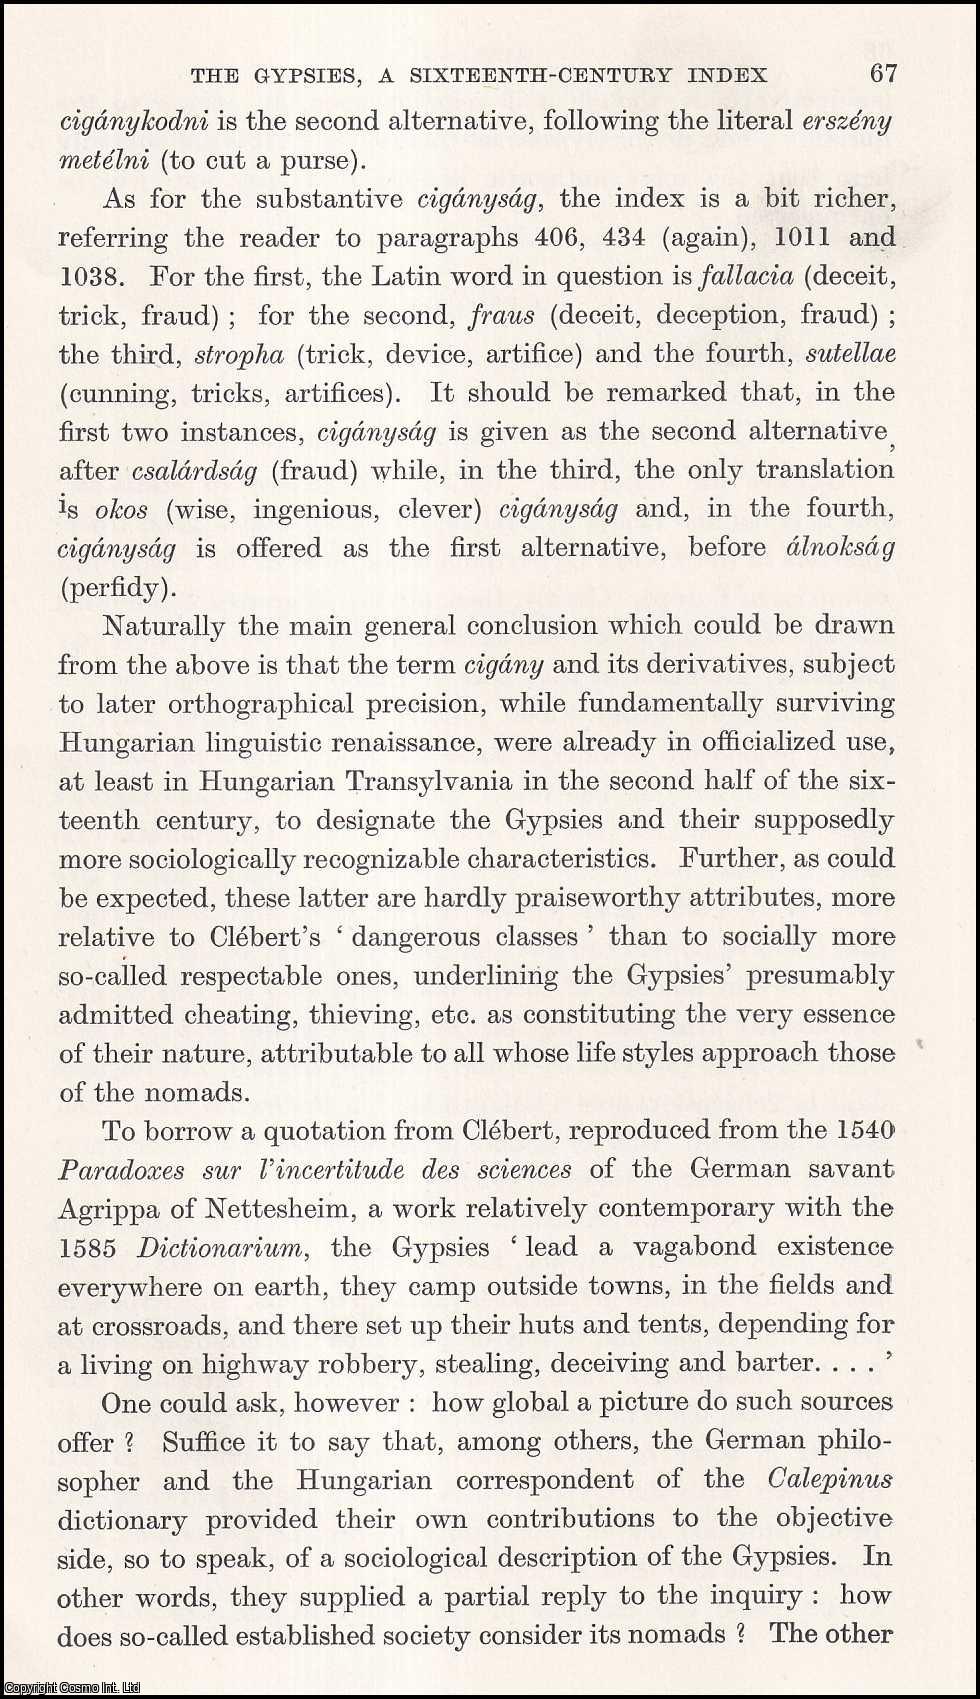 David Lesko - The Gypsies, a Sixteenth-Century Index. An uncommon original article from the Journal of the Gypsy Lore Society, 1970.